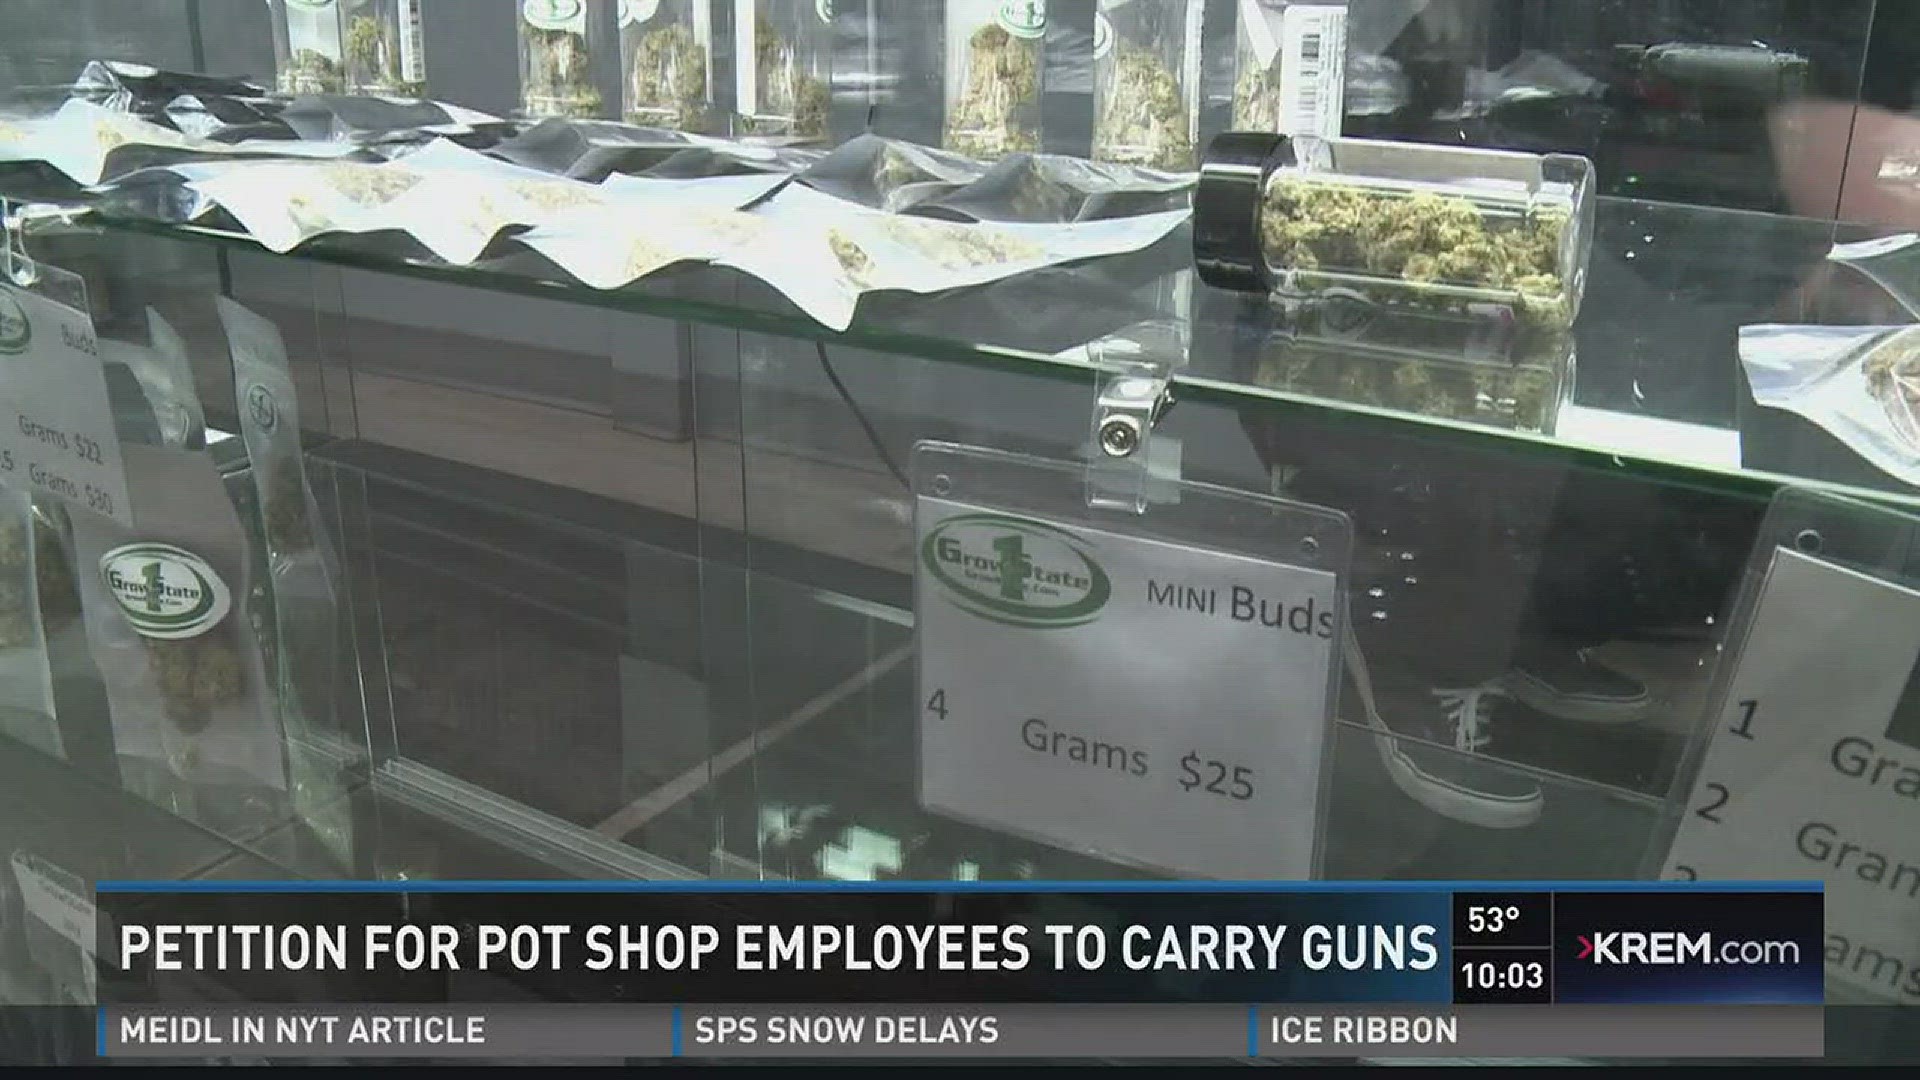 Petition for pot shop employees to carry guns  (11-22-17)